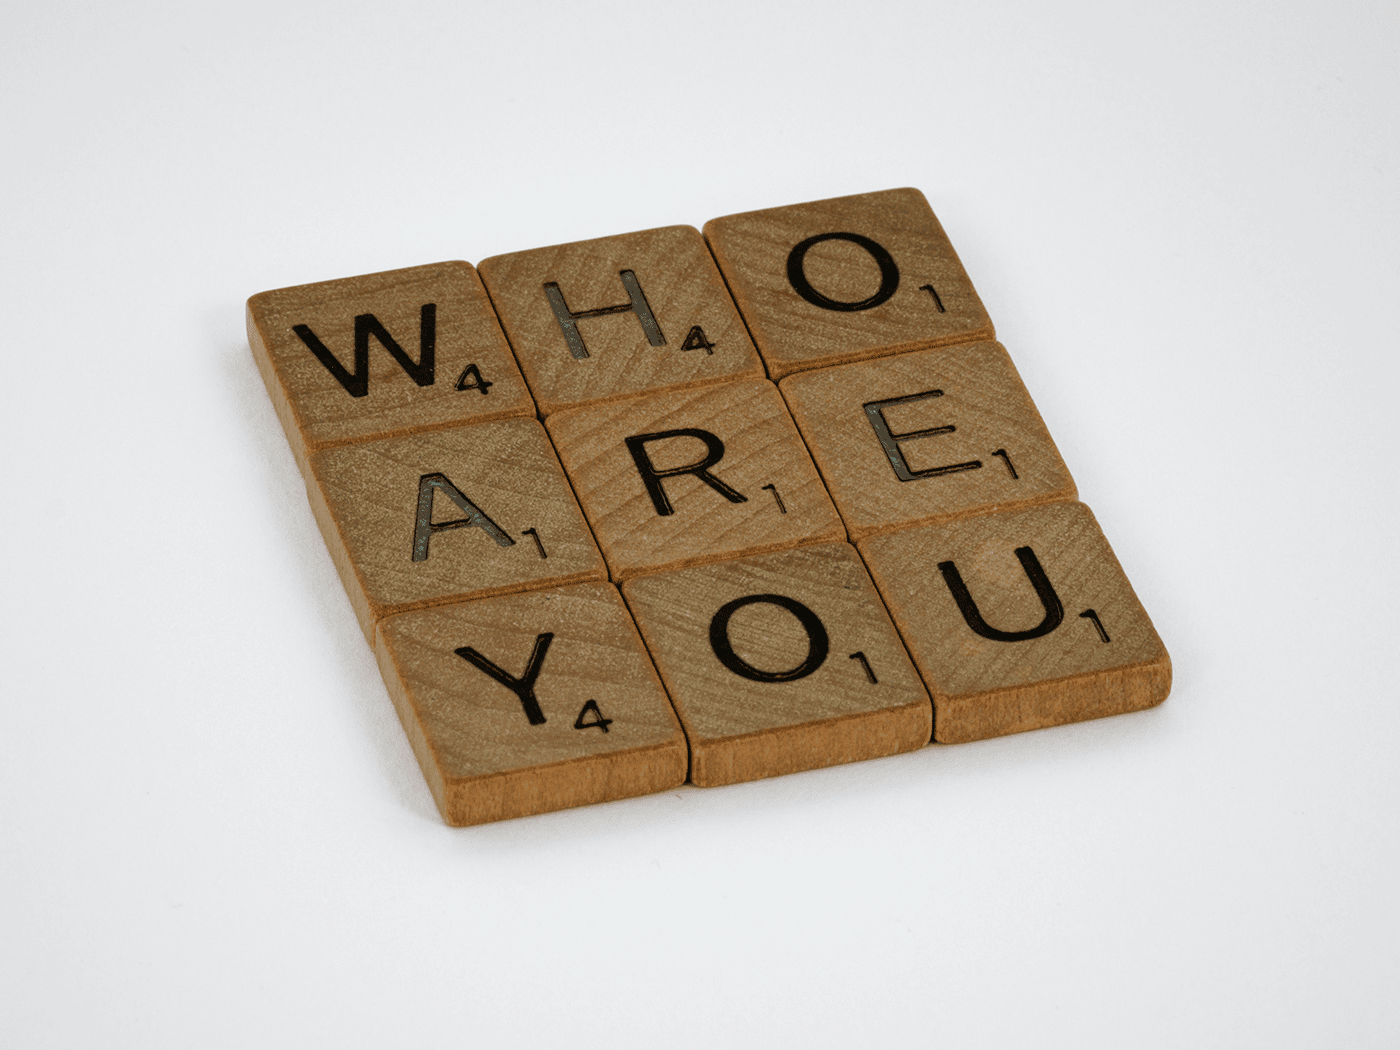 who are you letter blocks